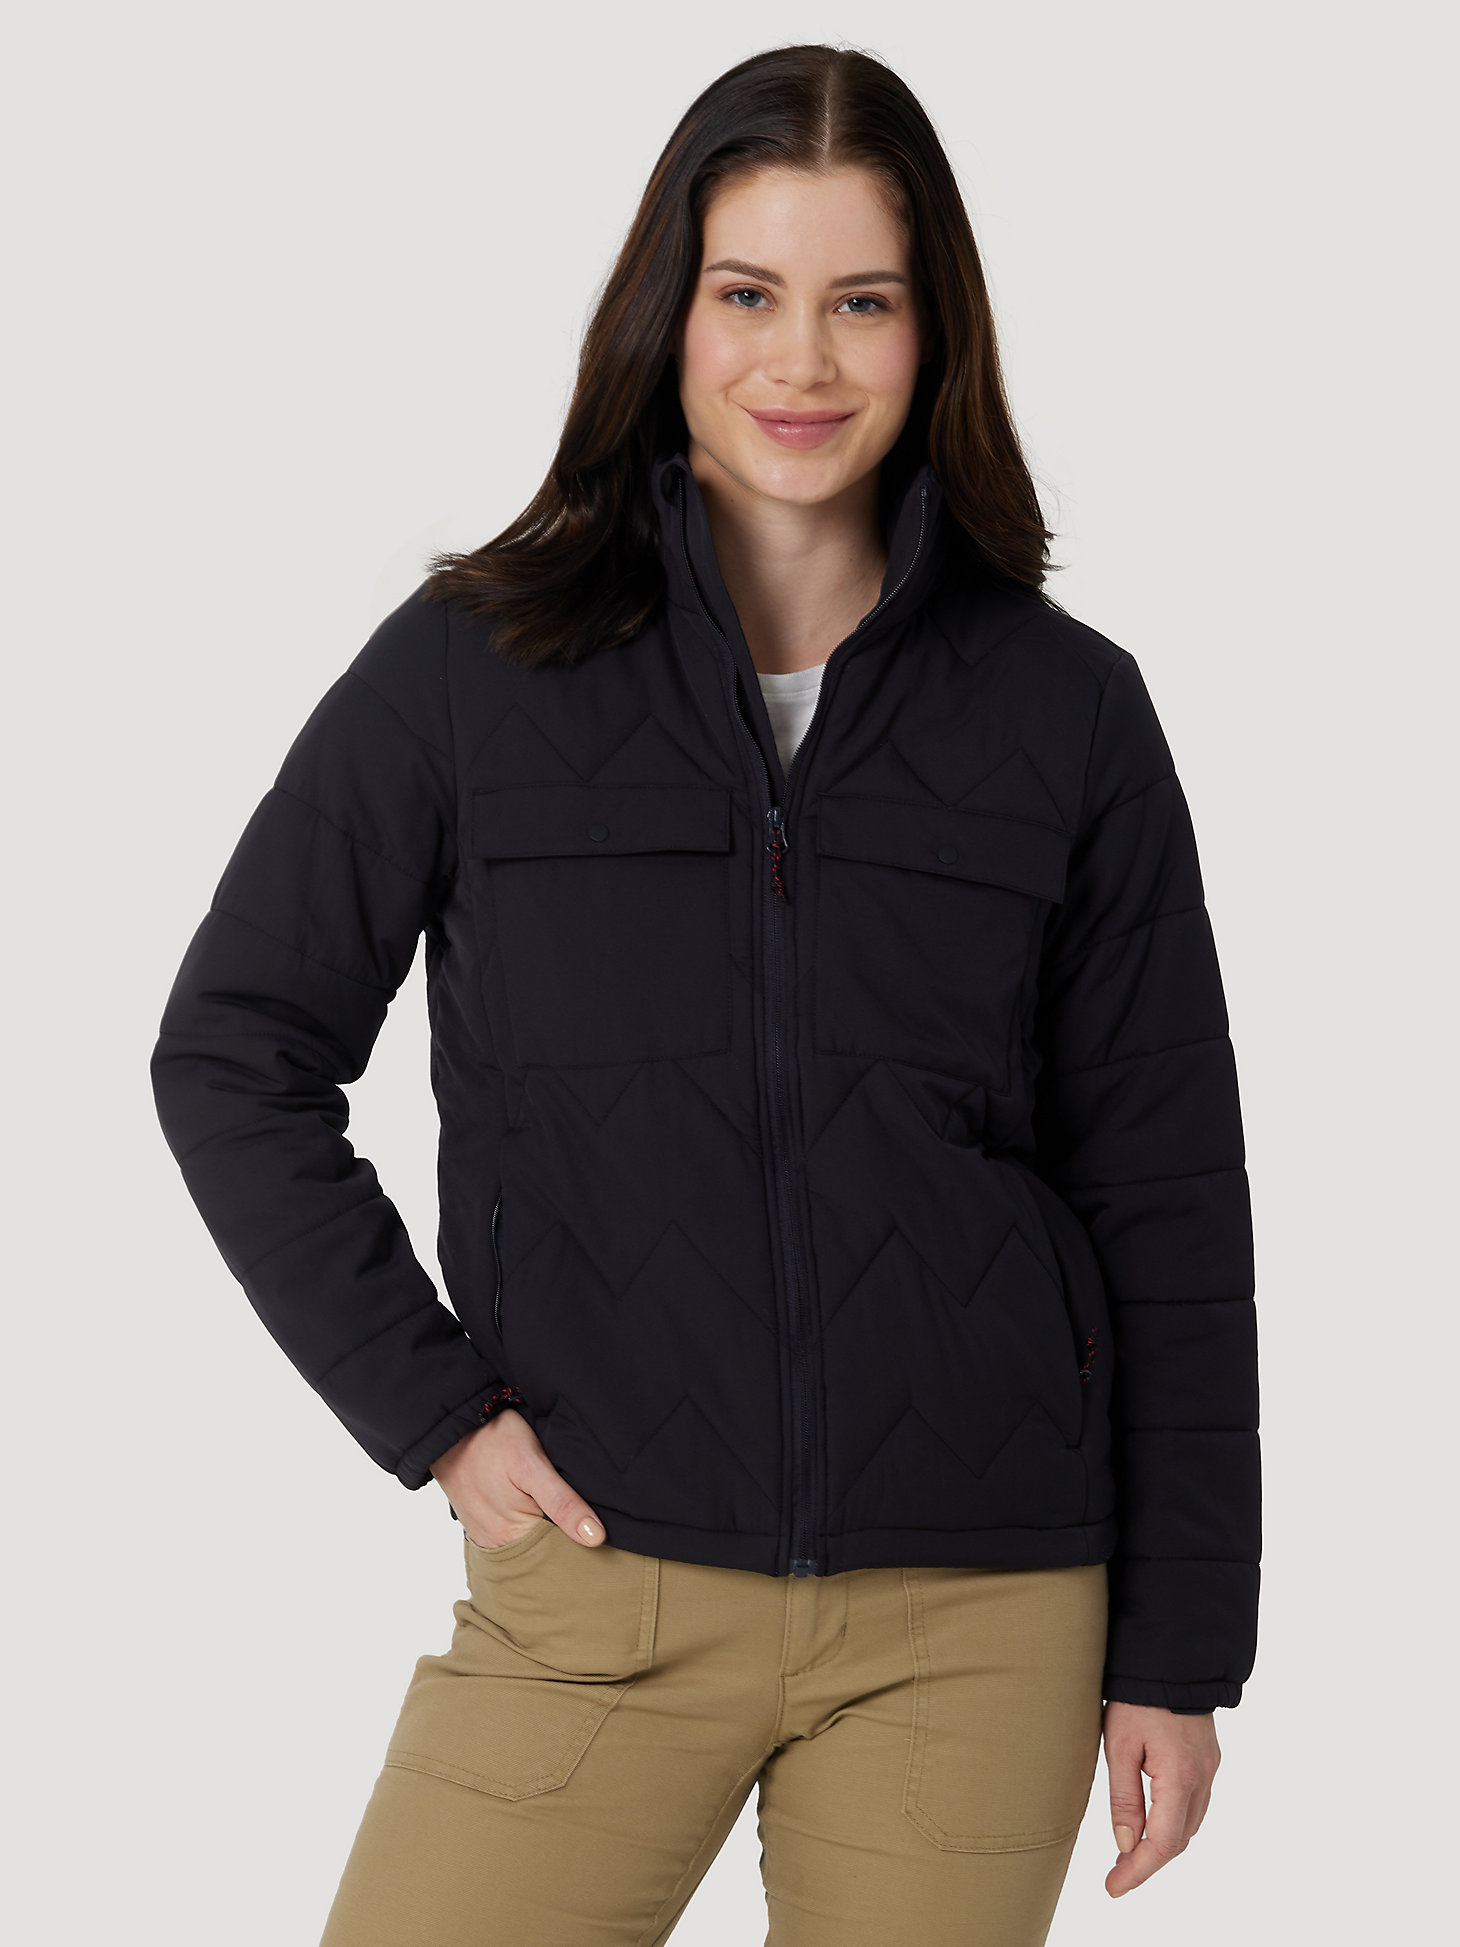 ATG Womens Packable Quilted Jacket:Jet Black:XXL alternative view 2